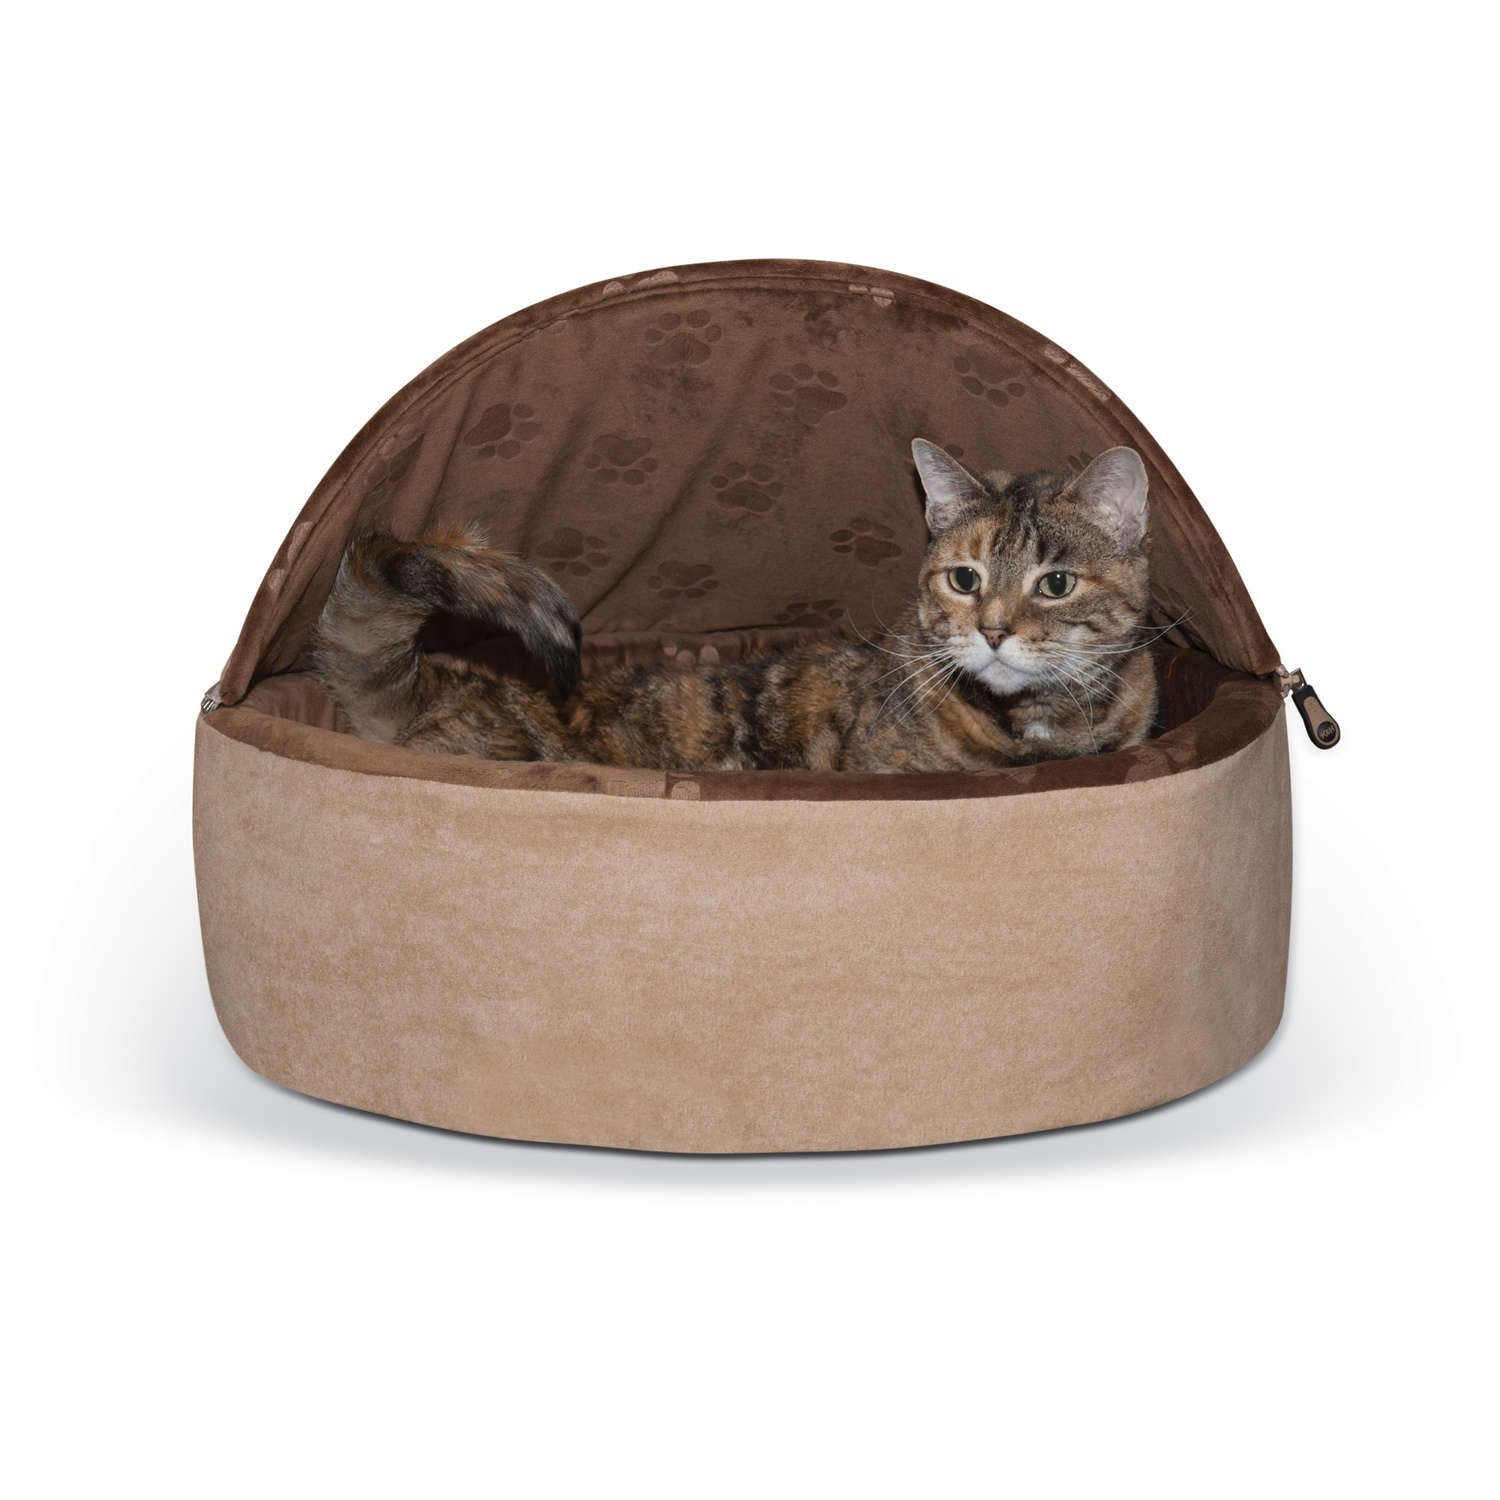 K&h Pet Products Kh2997 Self-warming Kitty Bed Hooded